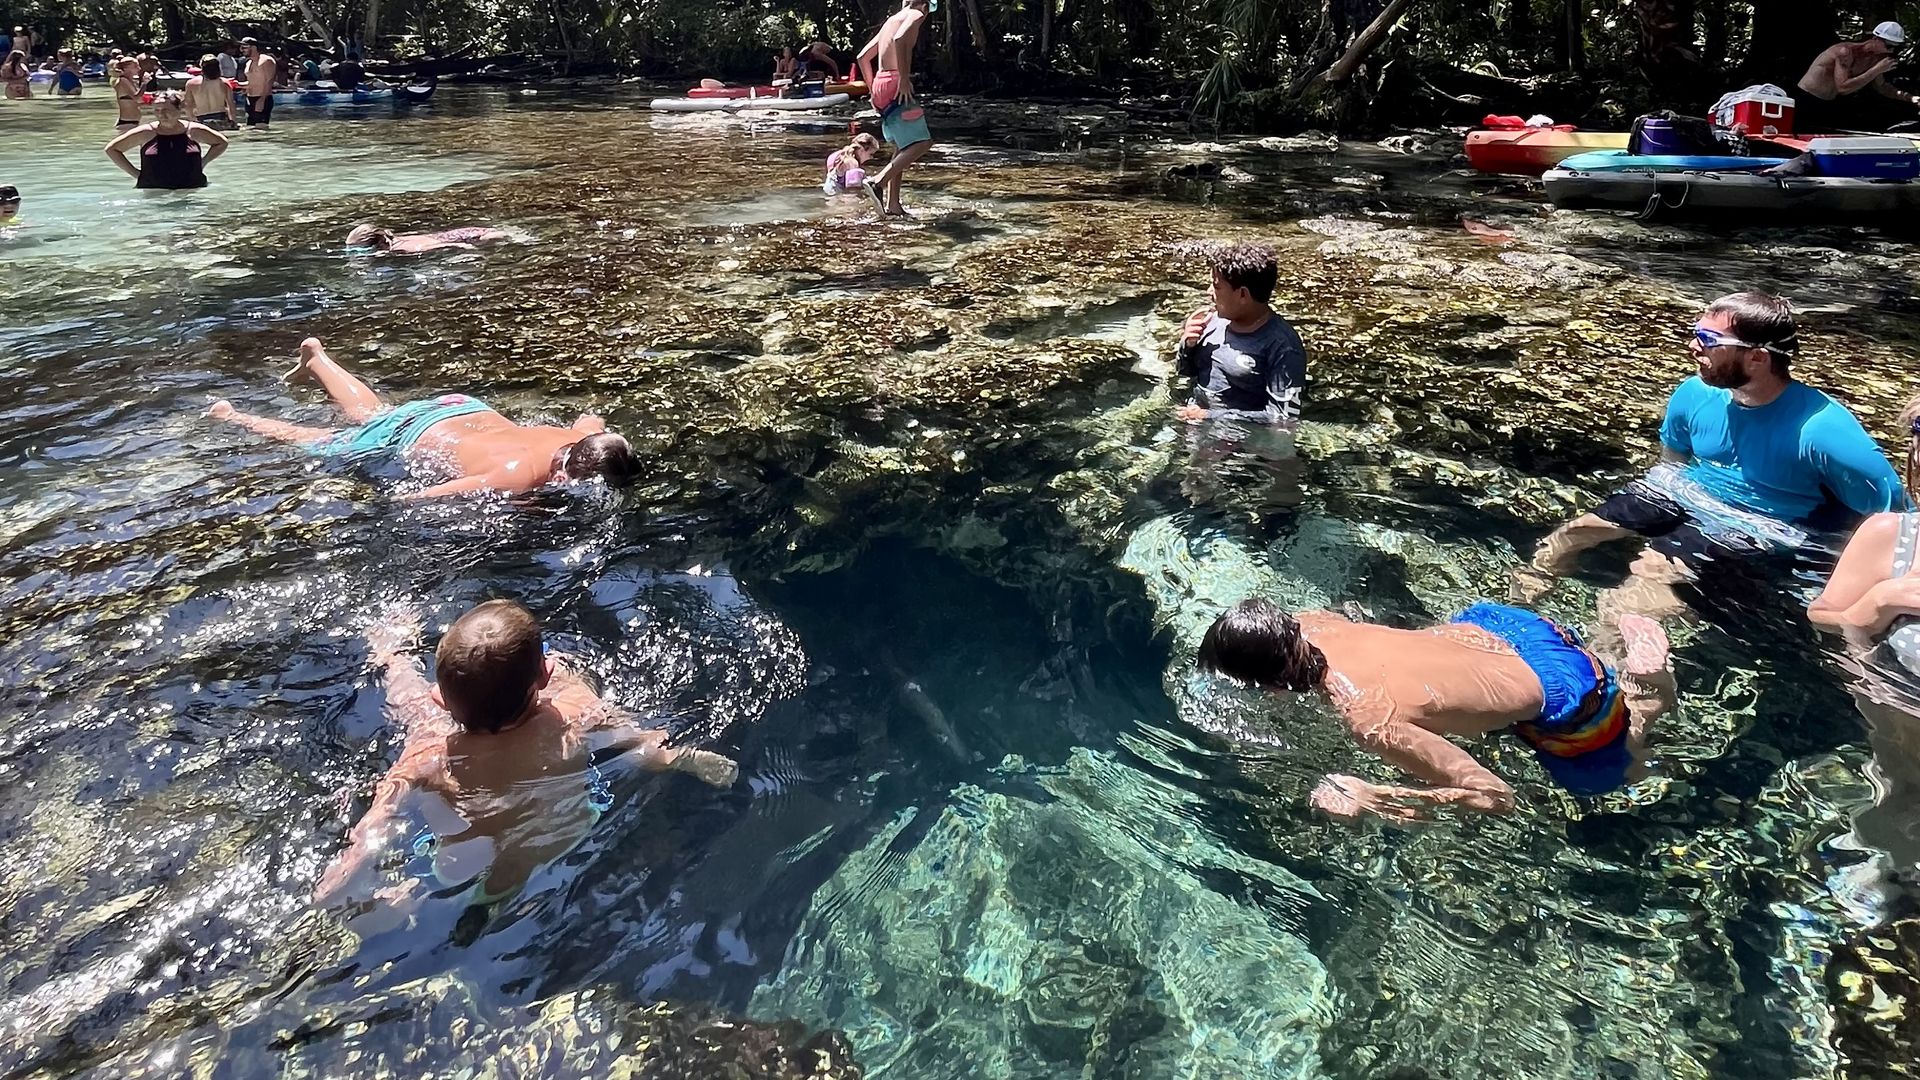 Clear, turquoise water reveals a deep spring surrounded by rocks. Two boys in blue swim trunks swim at the opening of the spring, surrounded by kayaks and other swimmers.